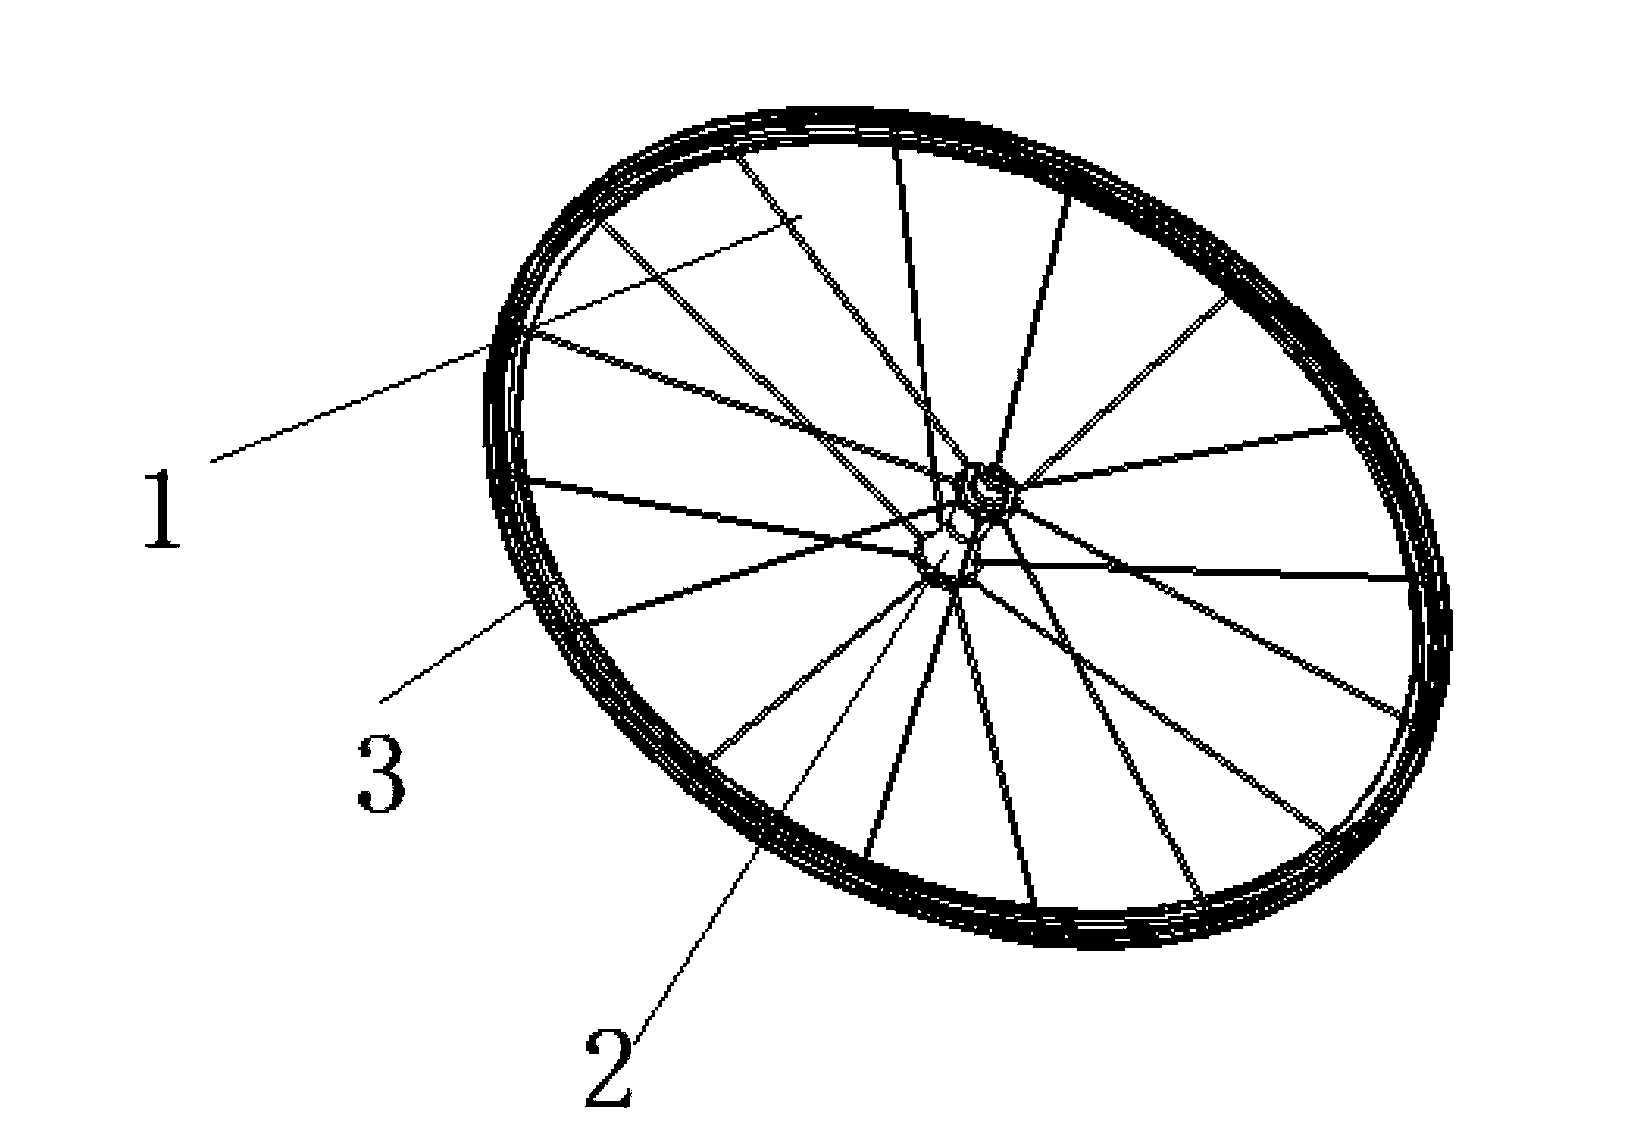 Improved structure for connecting wheel hub and steel wires